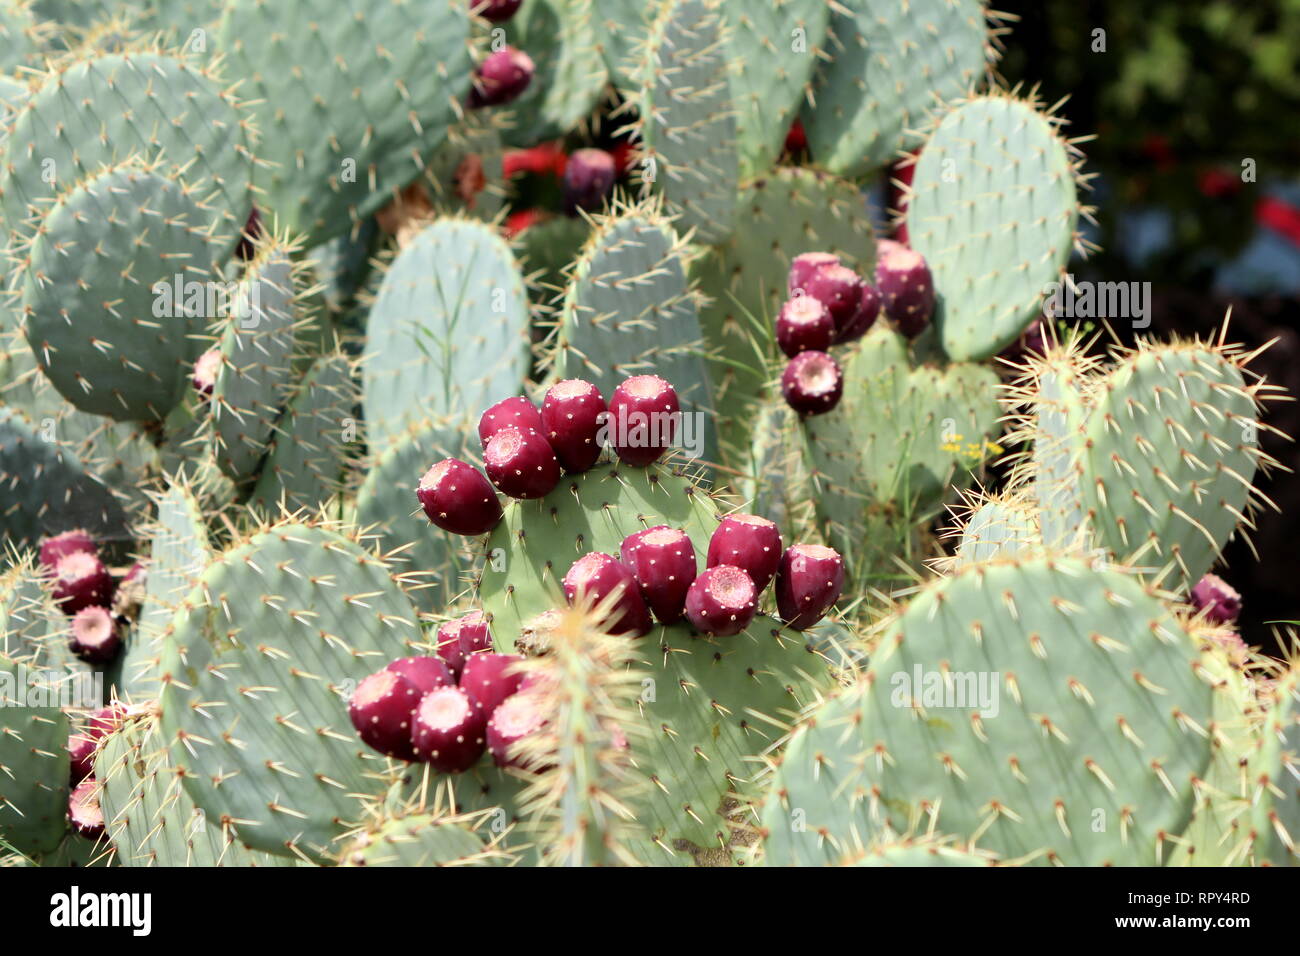 Many Barbary fig or Opuntia ficus-indica or Prickly pear or Indian fig opuntia or Cactus pear or Spineless cactus plants with multiple brown fruits Stock Photo